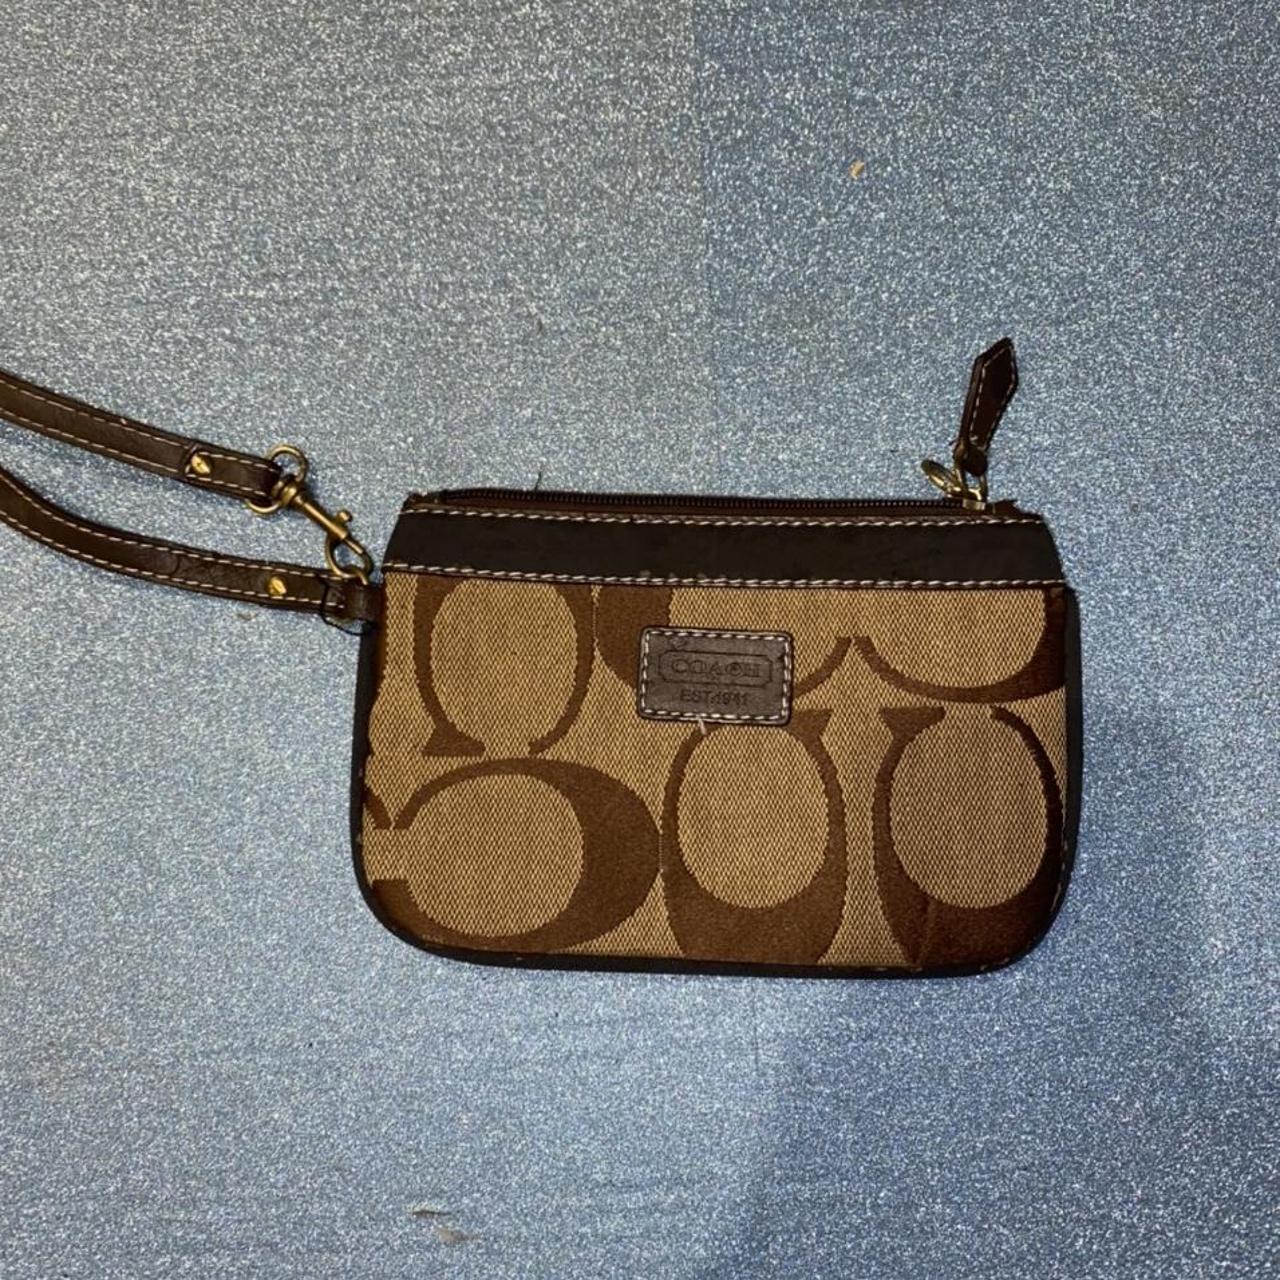 Coach Wristlet only paypal payments will be... - Depop